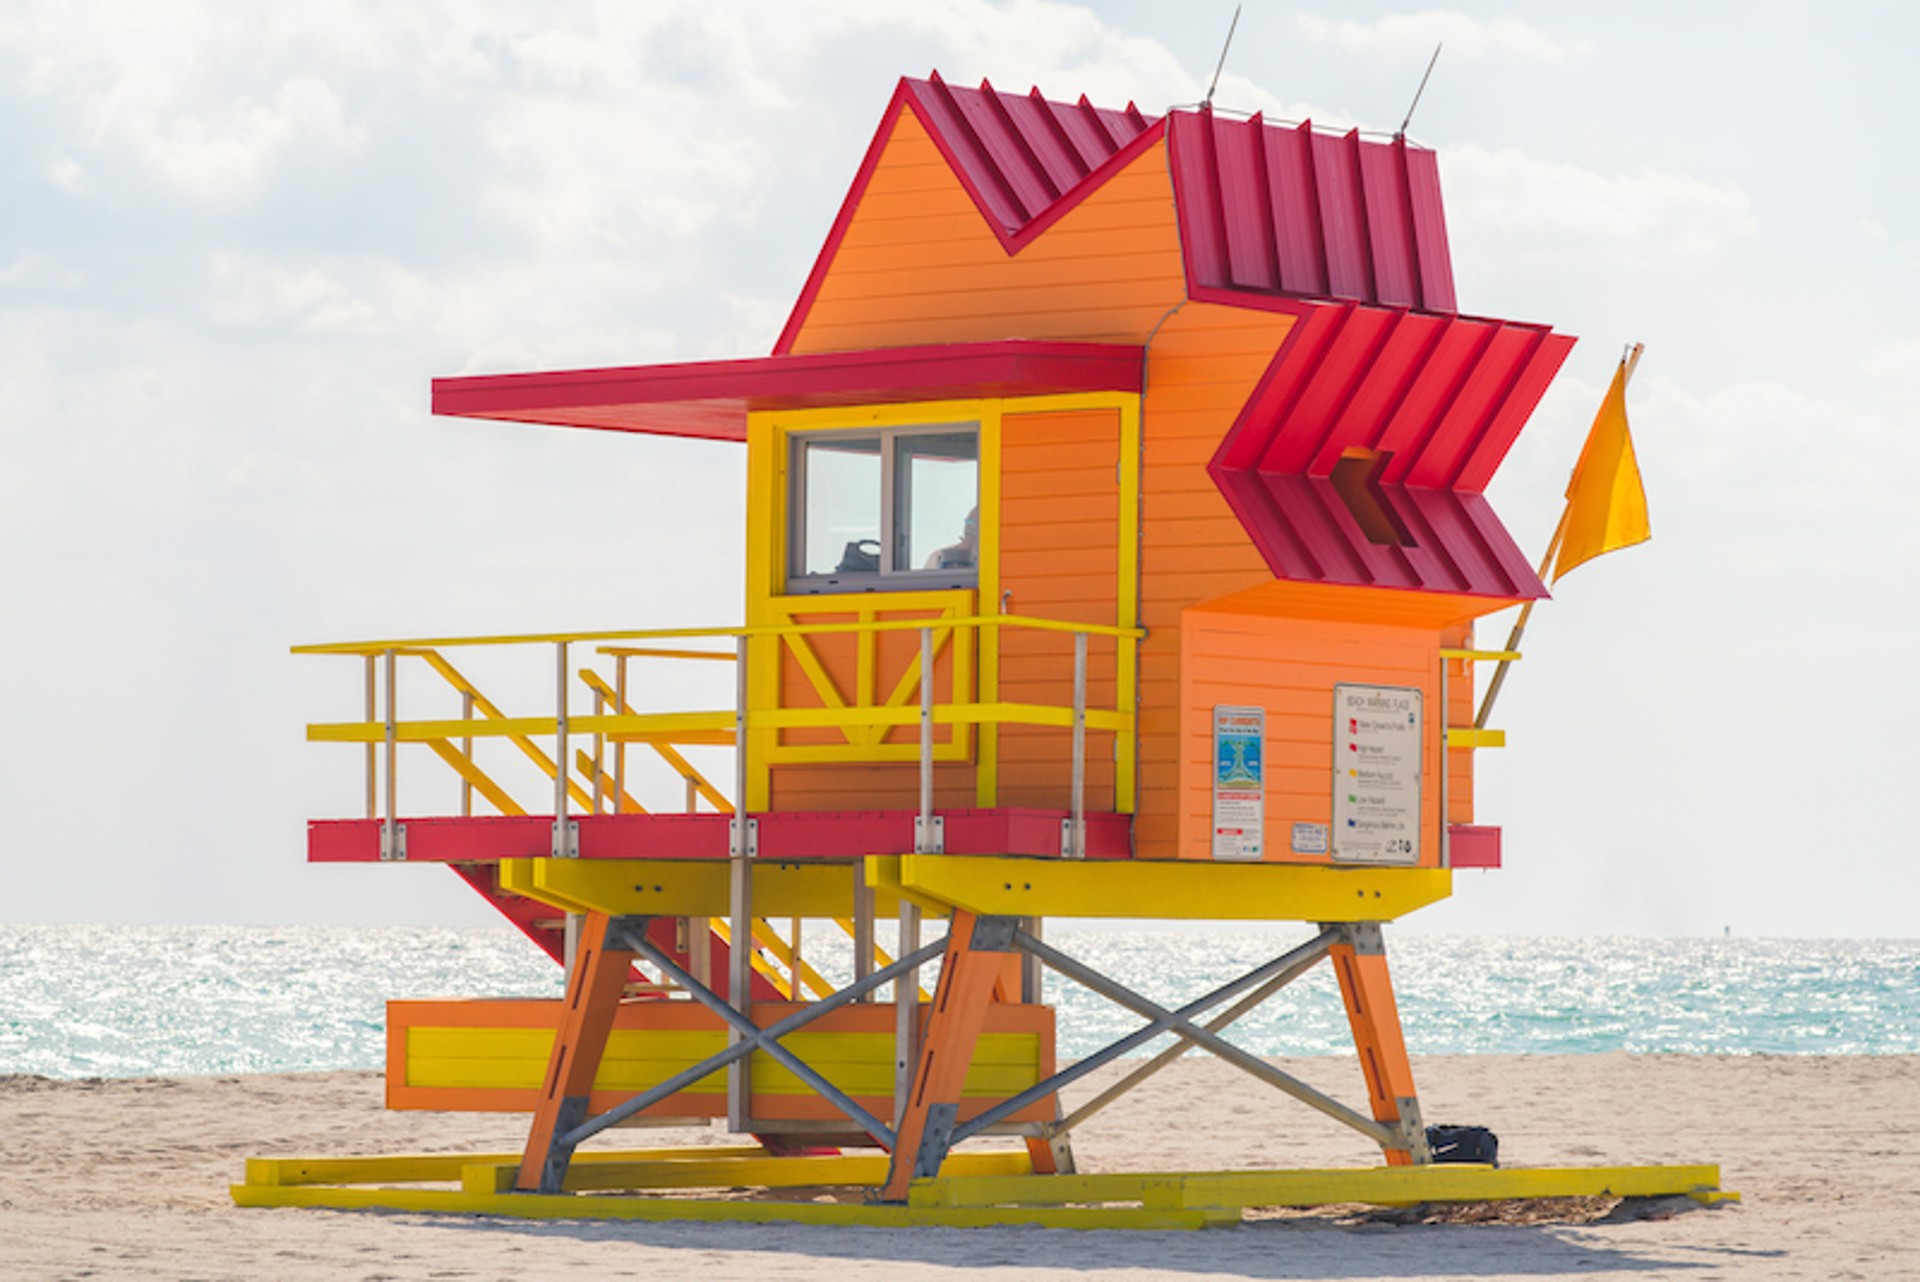 8th St. Miami Lifeguard Stand - Side View by Peter Mendelson